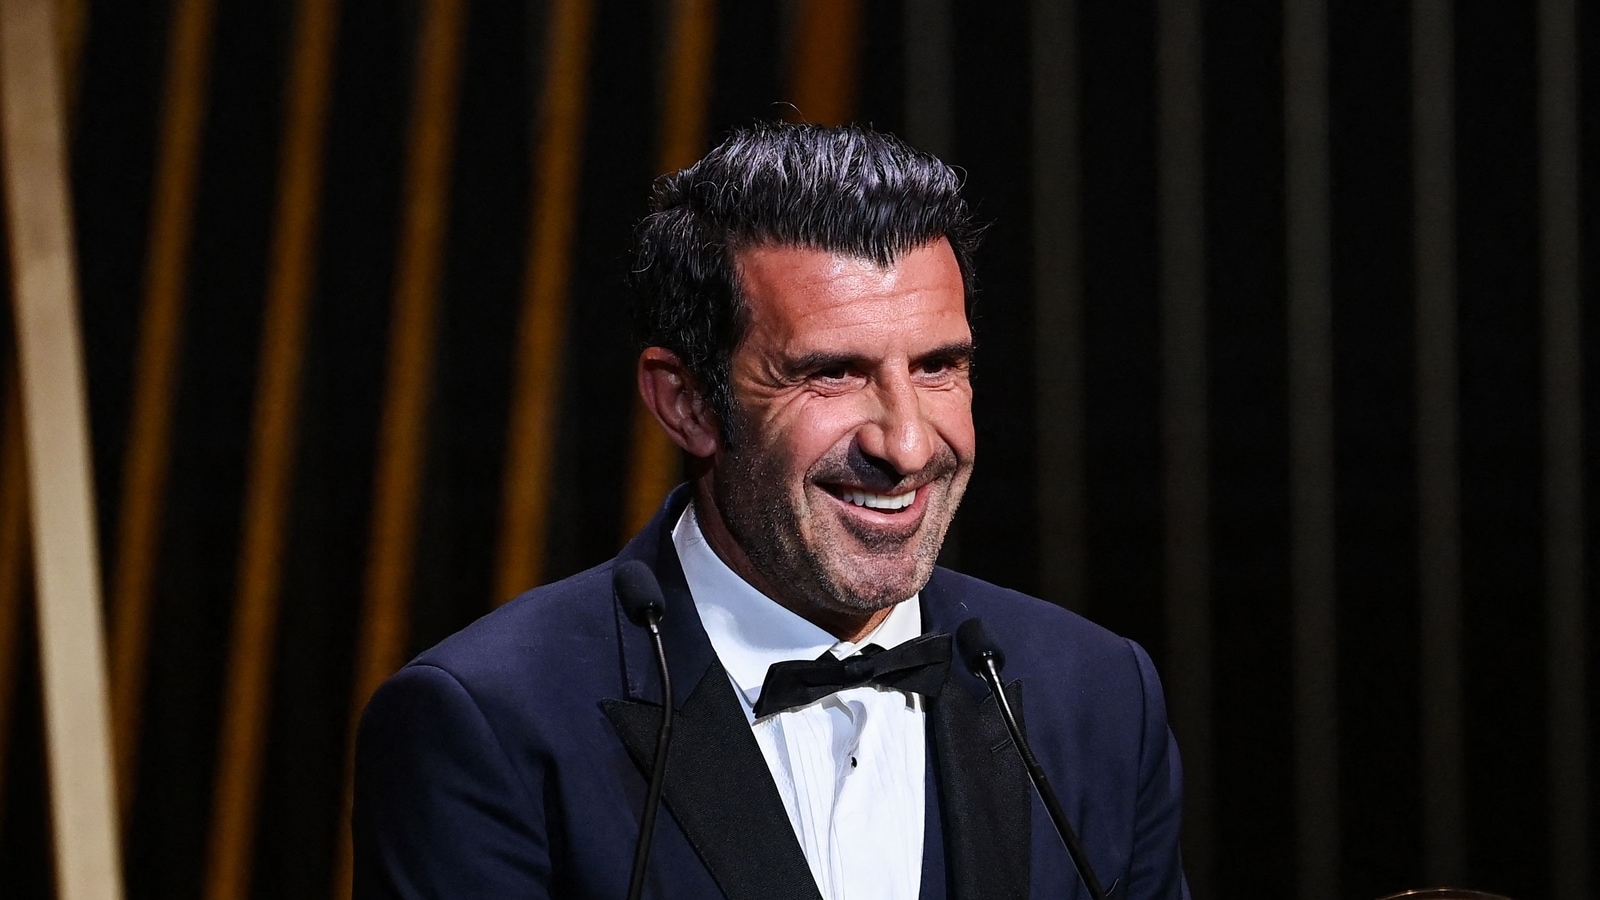 In terms of players, Brazil can have two teams: Figo